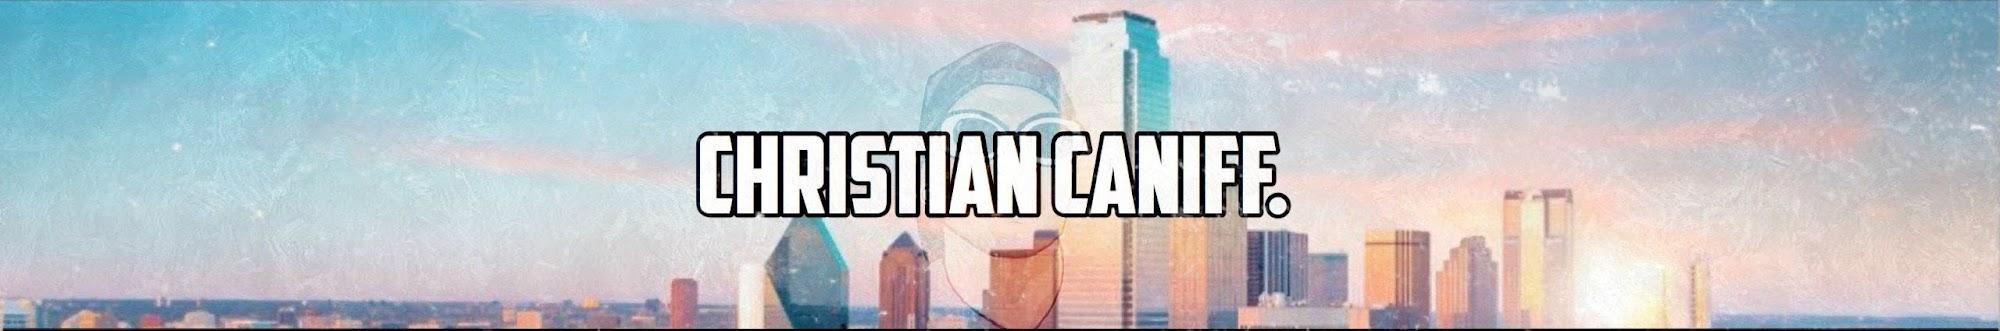 Christian Caniff